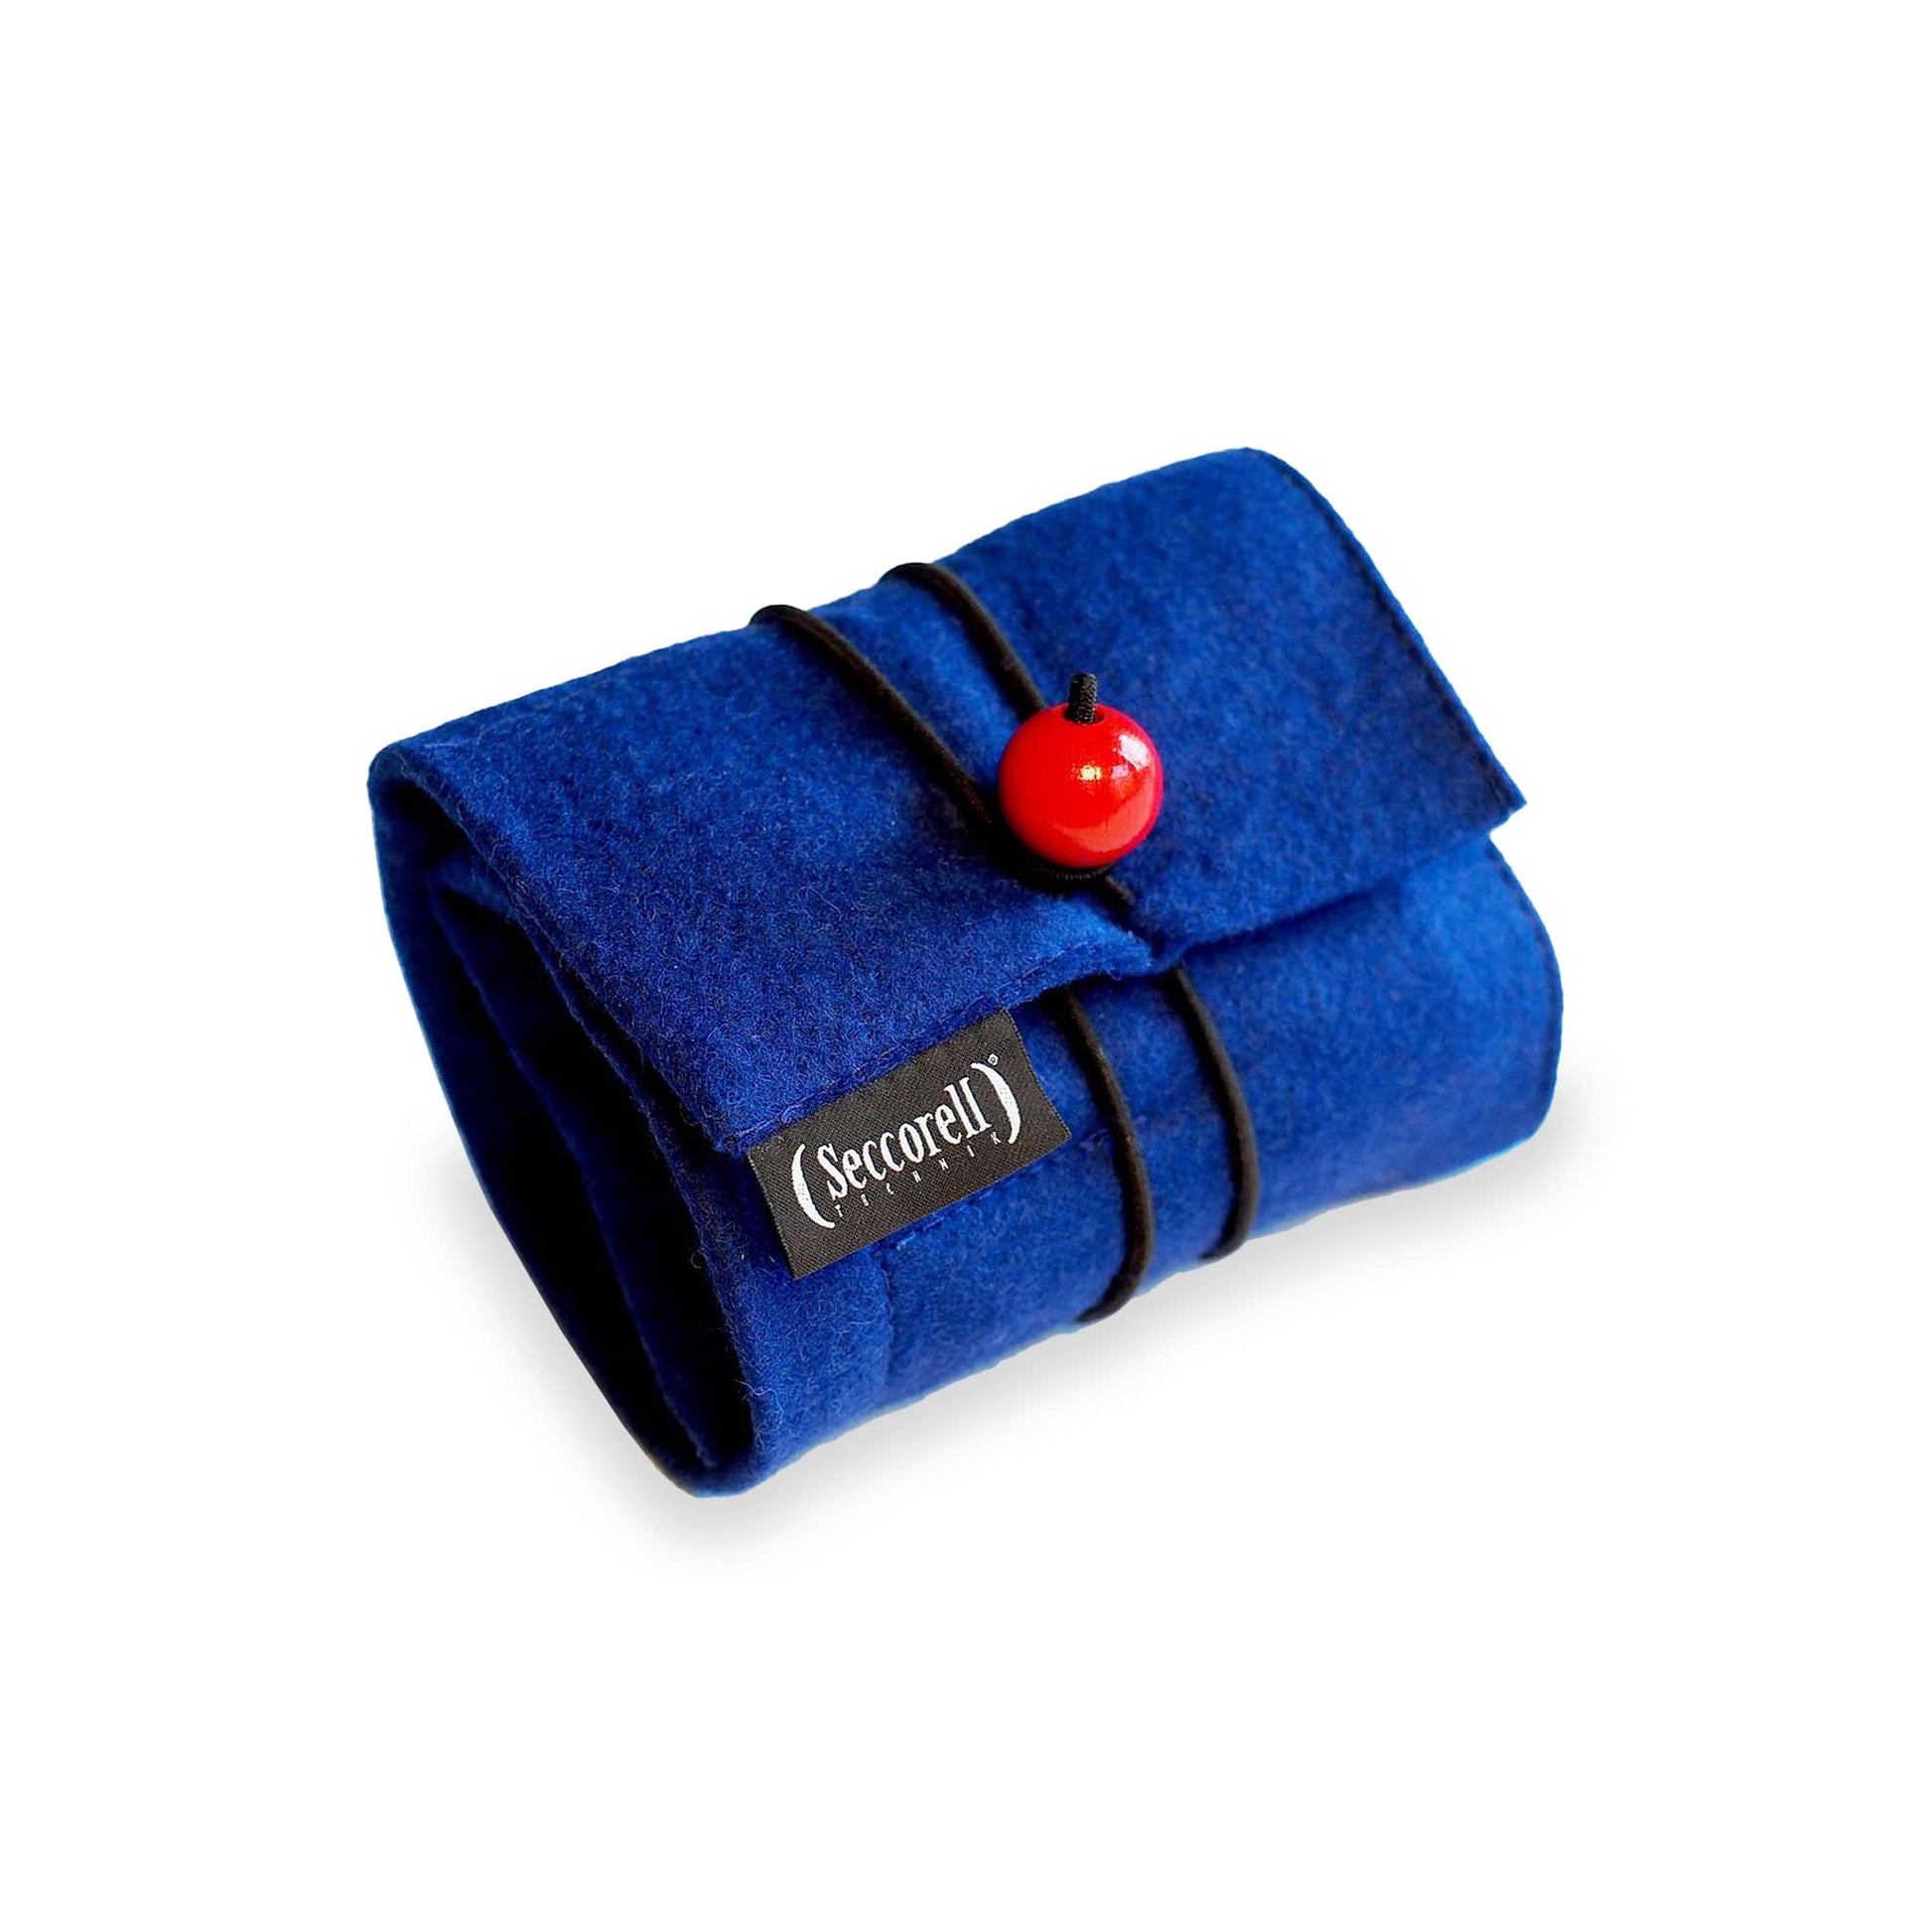 Seccorell felt roller bag in blue with elastic cord and red wooden bead, including paint sticks, rubbing block, natural brush and accessory compartment.